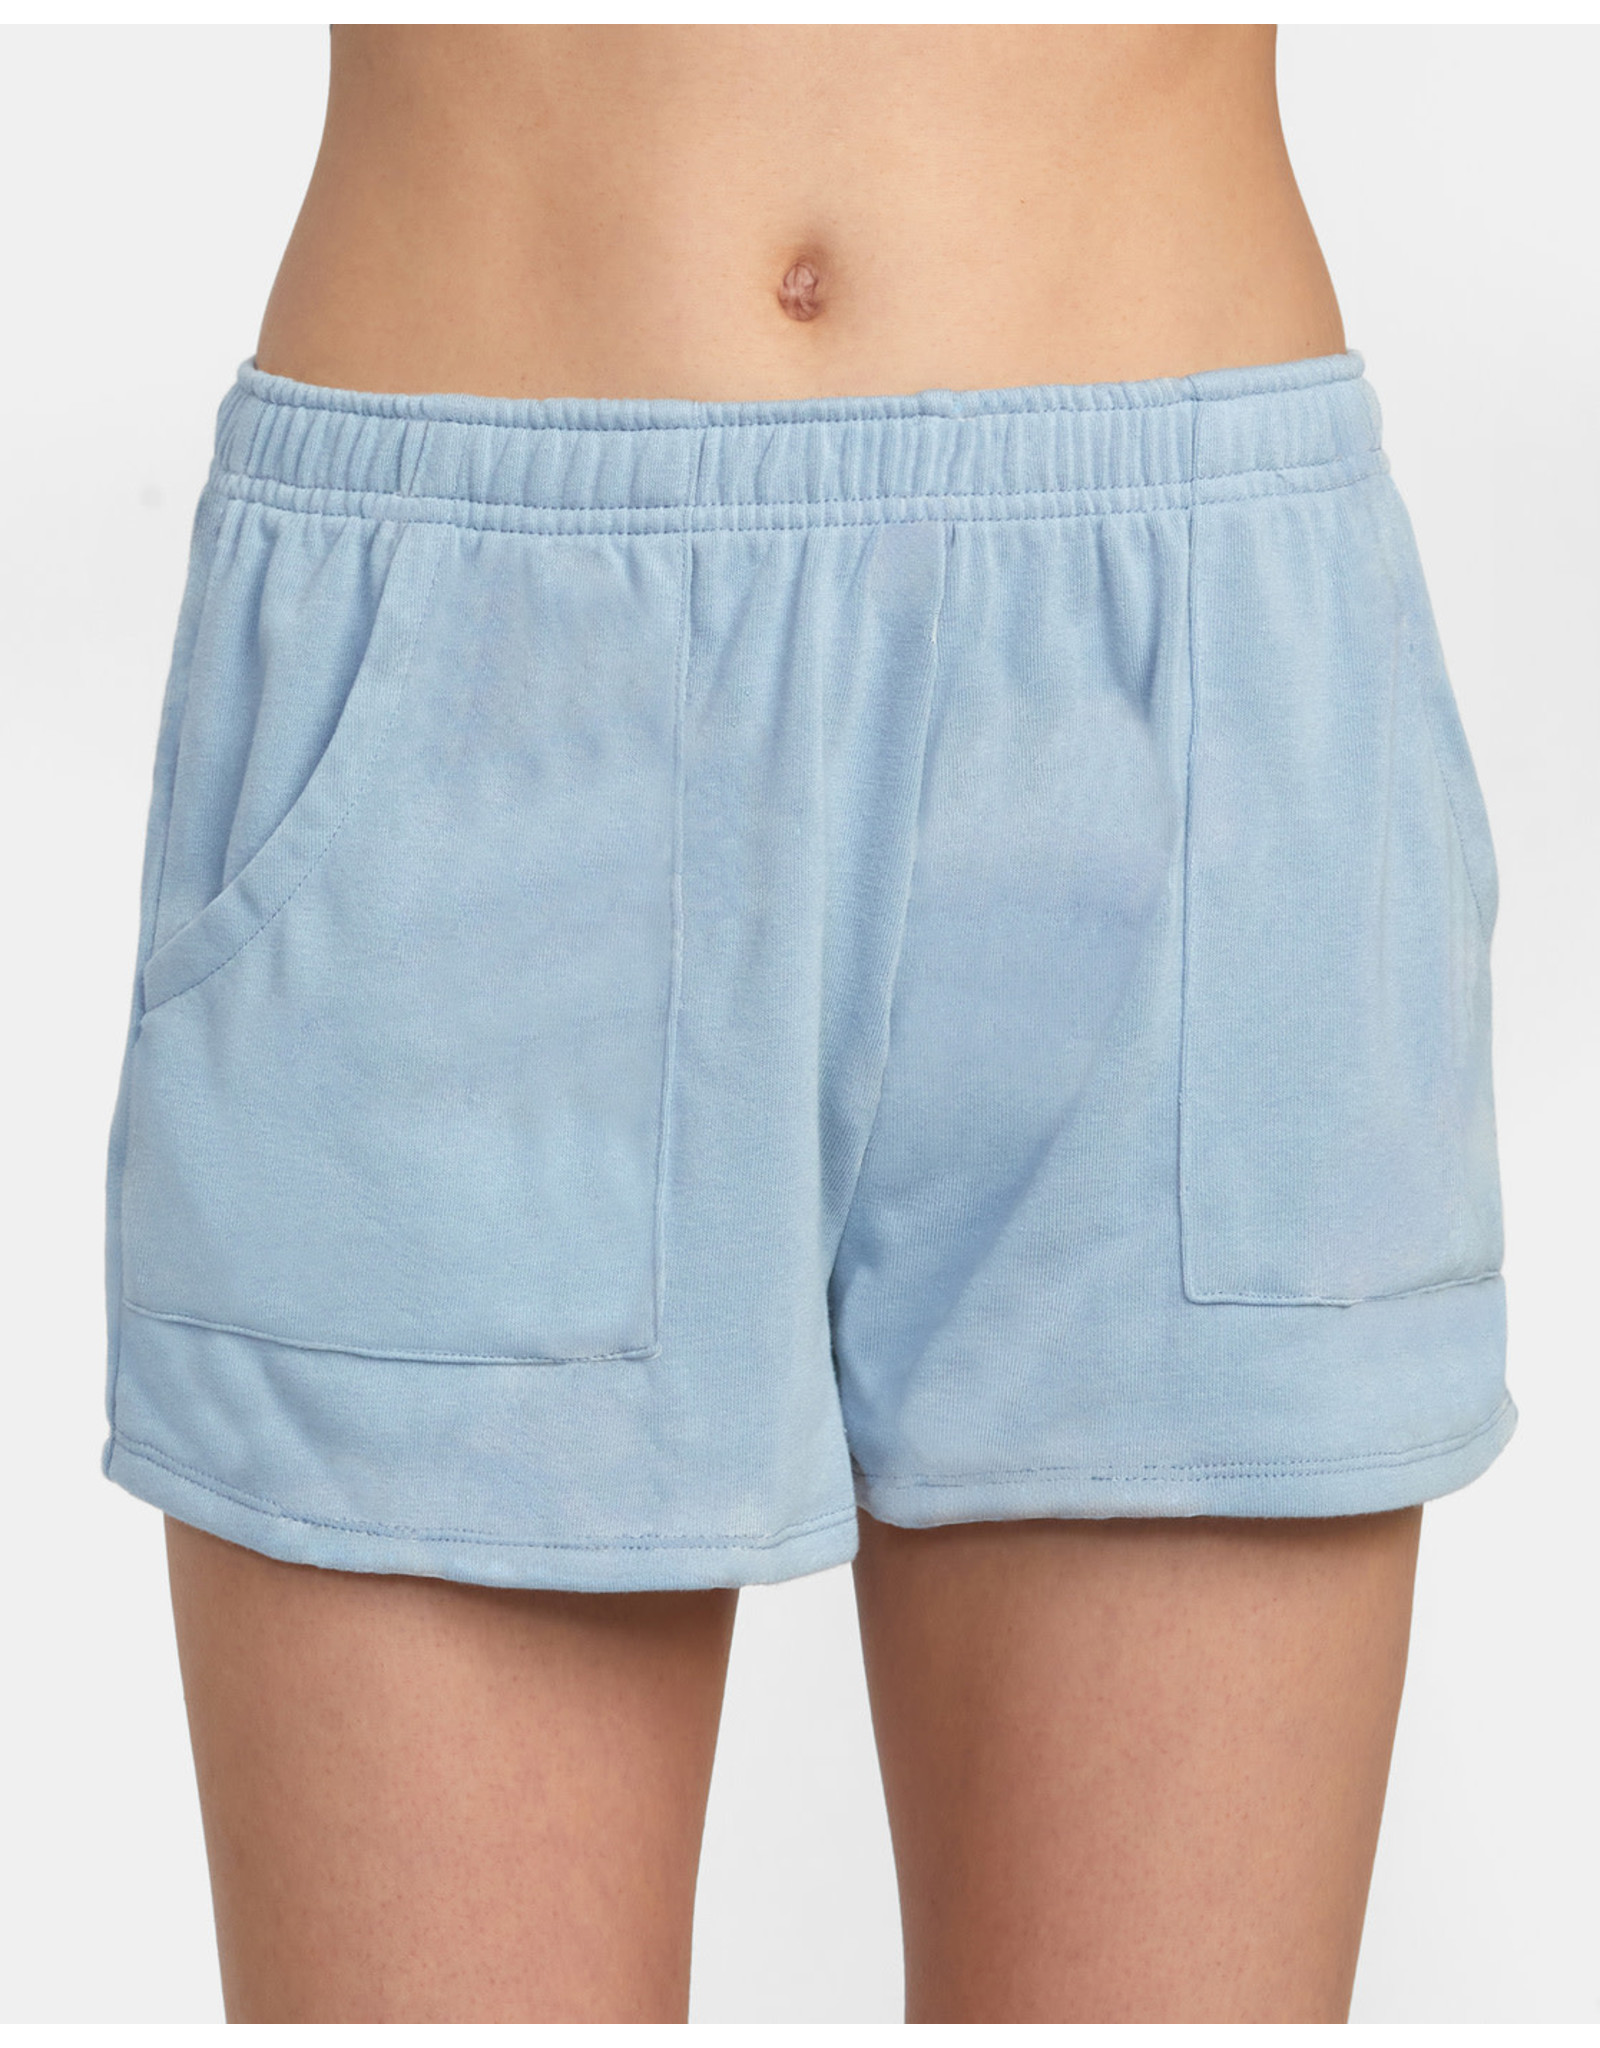 RVCA Girls Seapoint Shorts